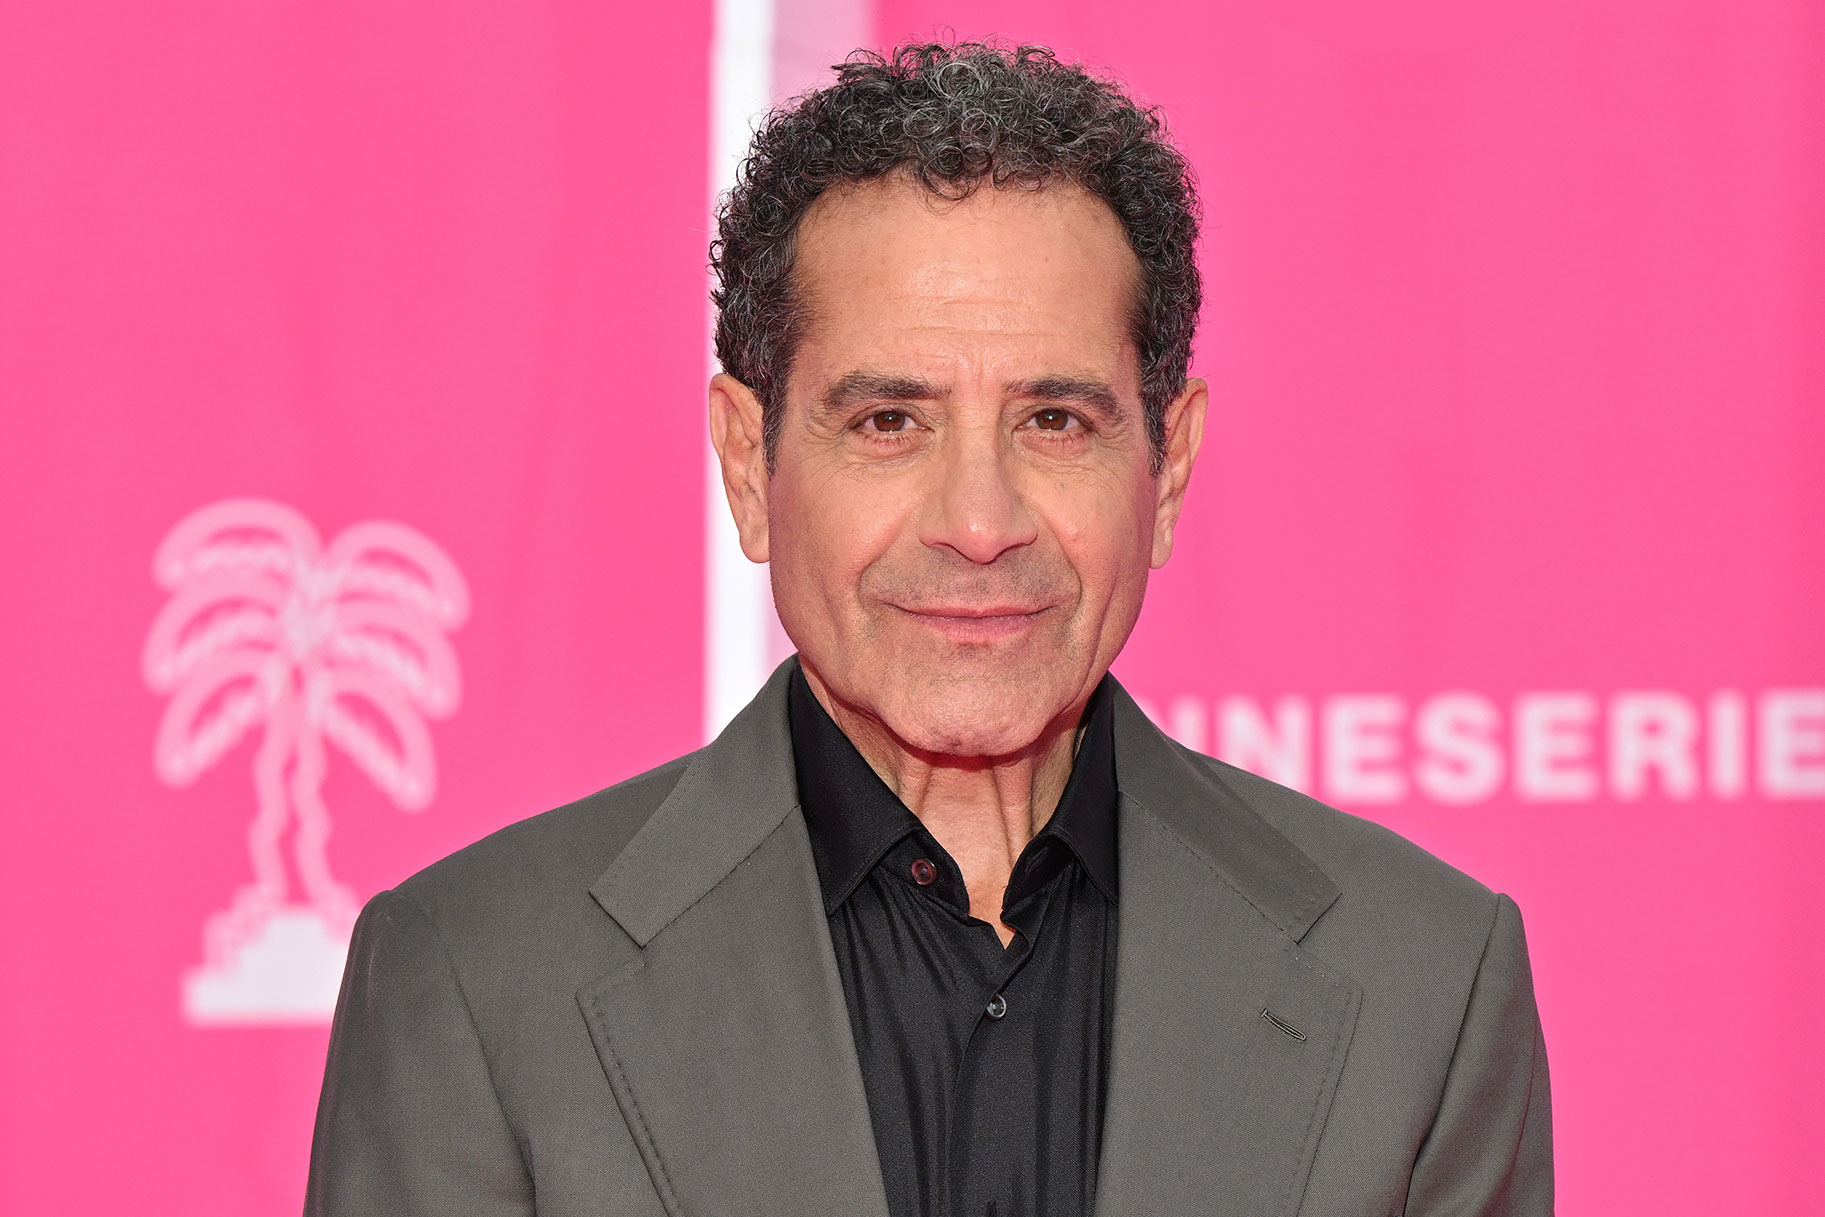 Tony Shalhoub stands in front of a pink backdrop for photo during the 6th Canneseries International Festival